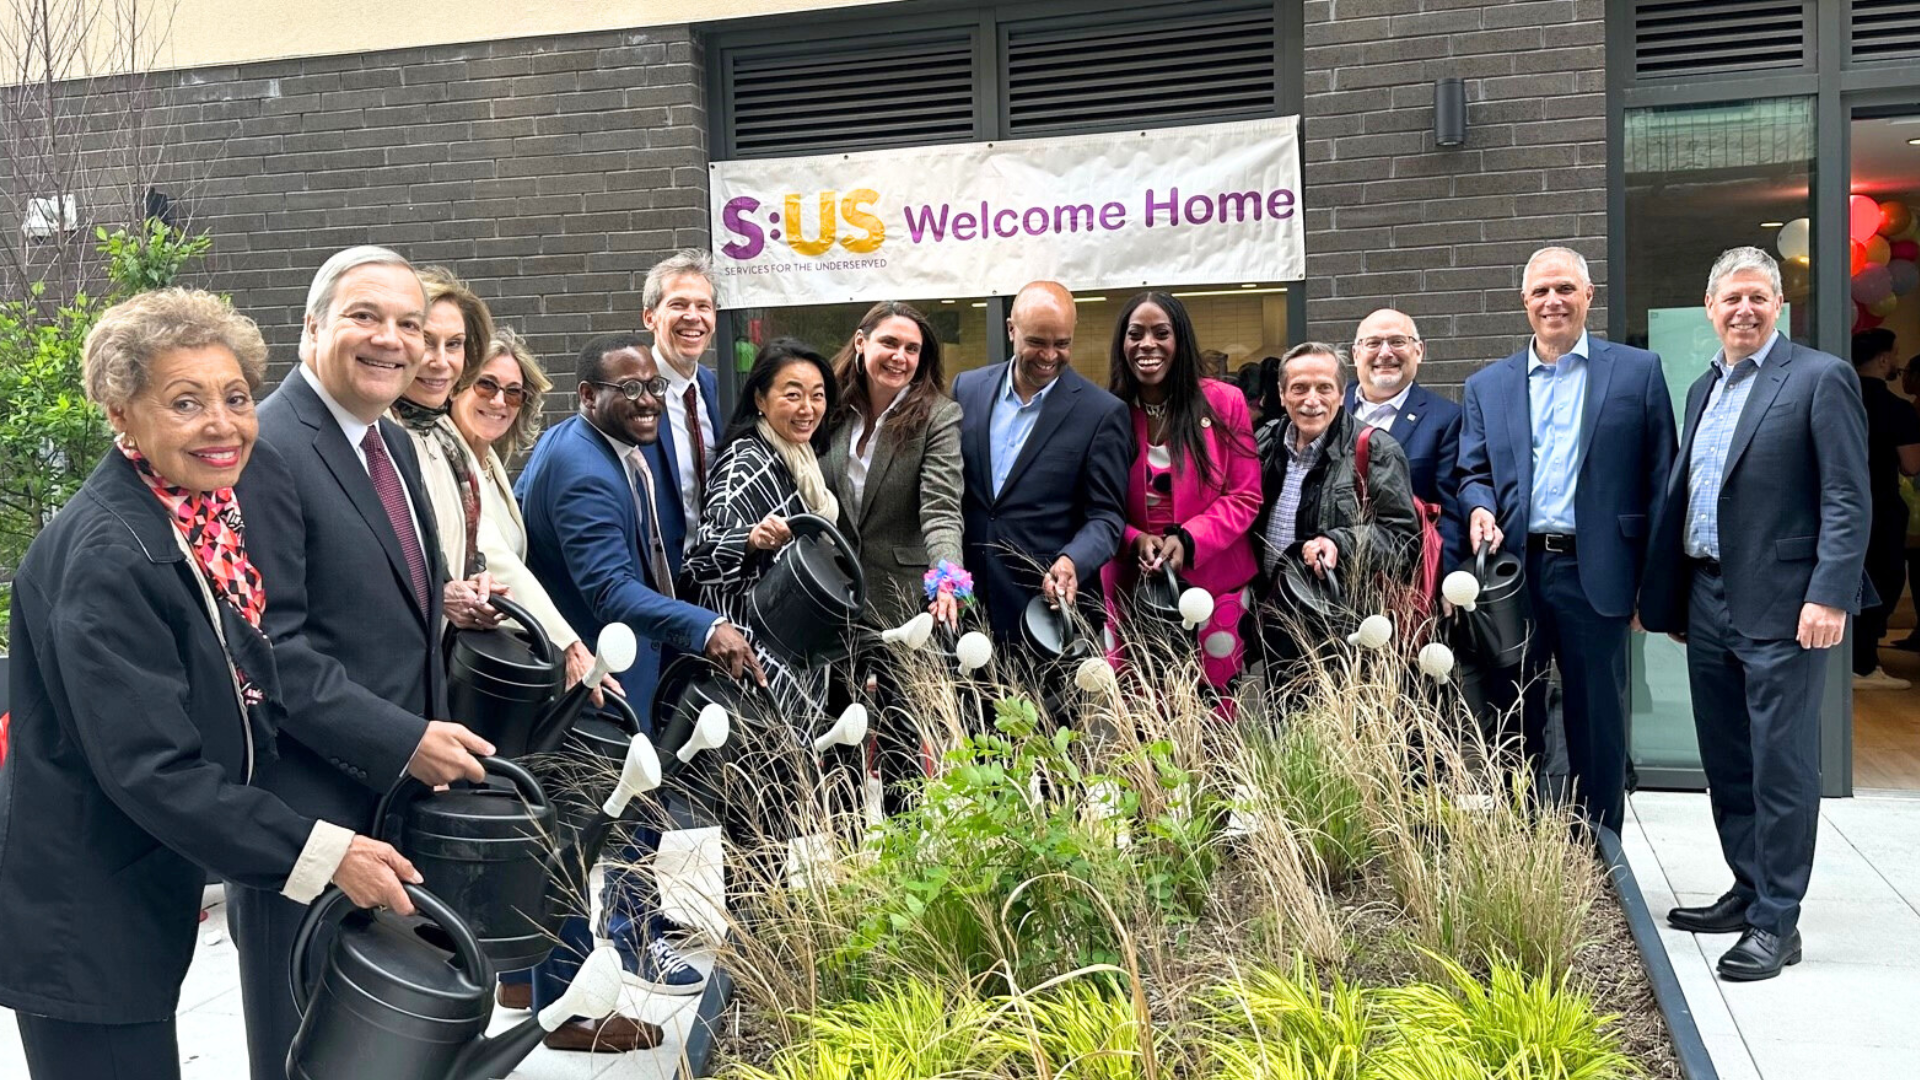 Services for the UnderServed, Bronx Pro Group Celebrate Housewarming for Residents of New Supportive & Affordable Housing Complex